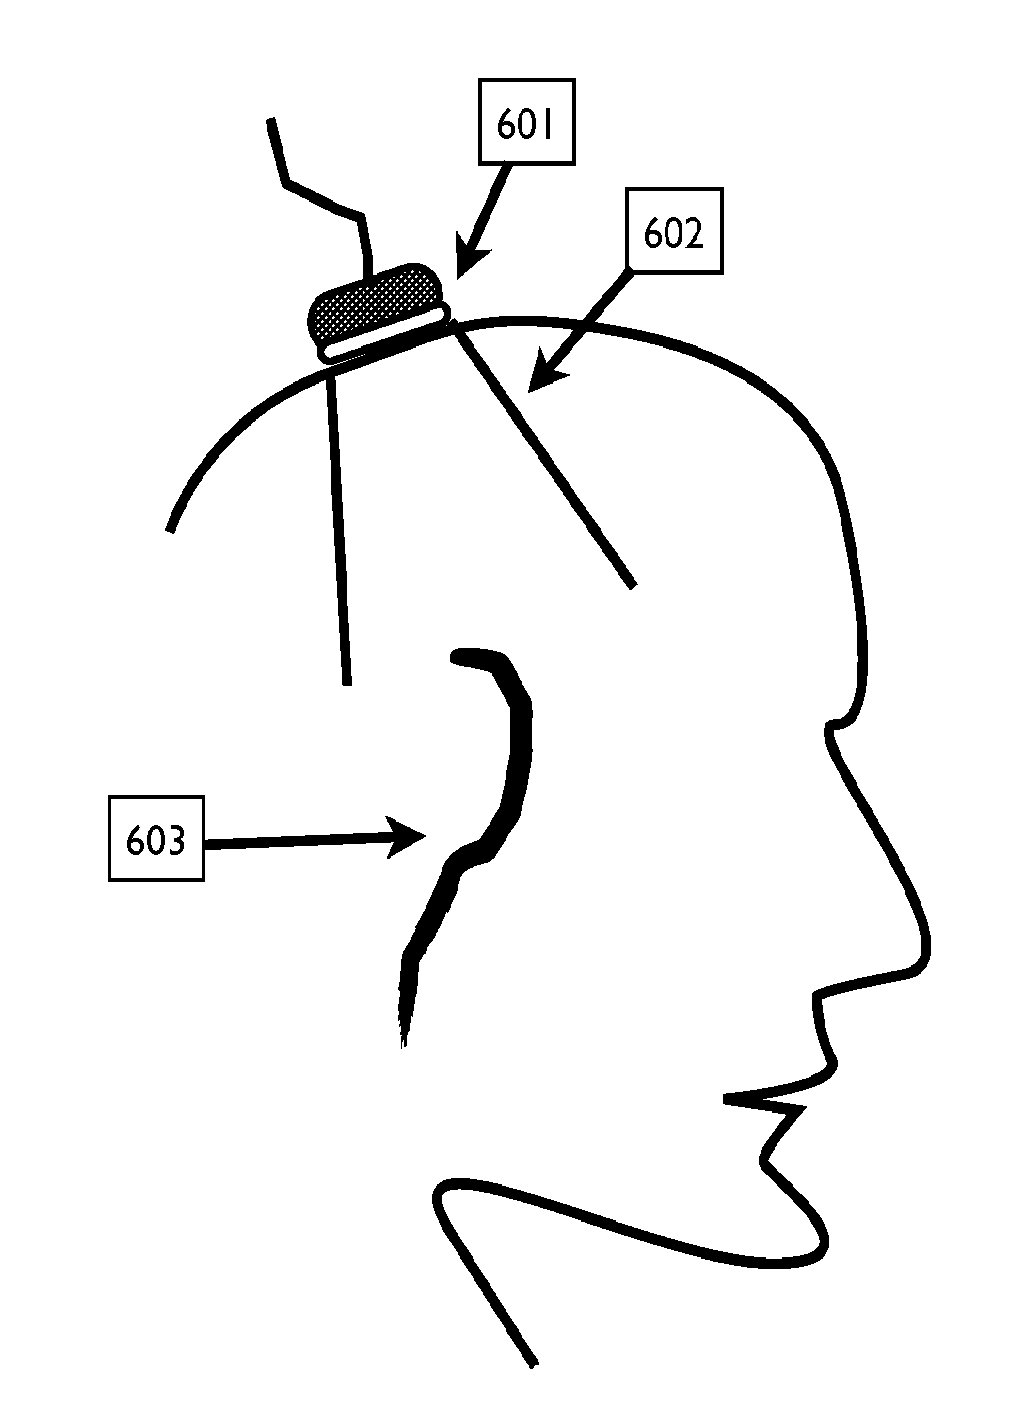 Device and Methods for Targeting of Transcranial Ultrasound Neuromodulation by Automated Transcranial Doppler Imaging